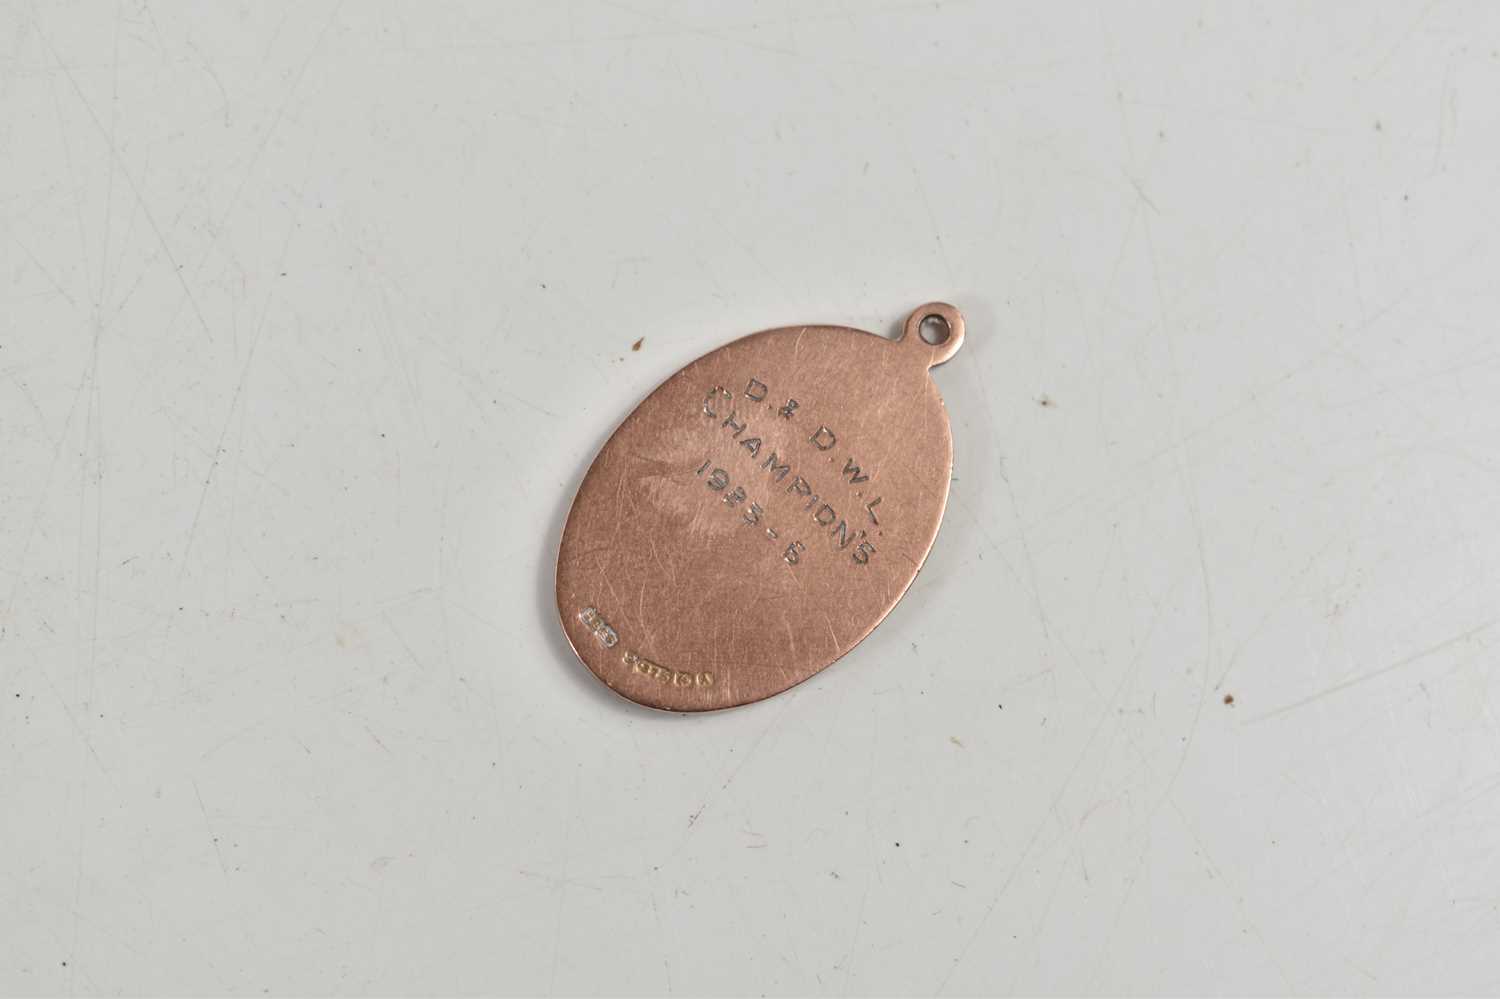 A 9ct gold fob medal pendant, D & D.W.L Champions 1925-26, 5.2g. - Image 2 of 2